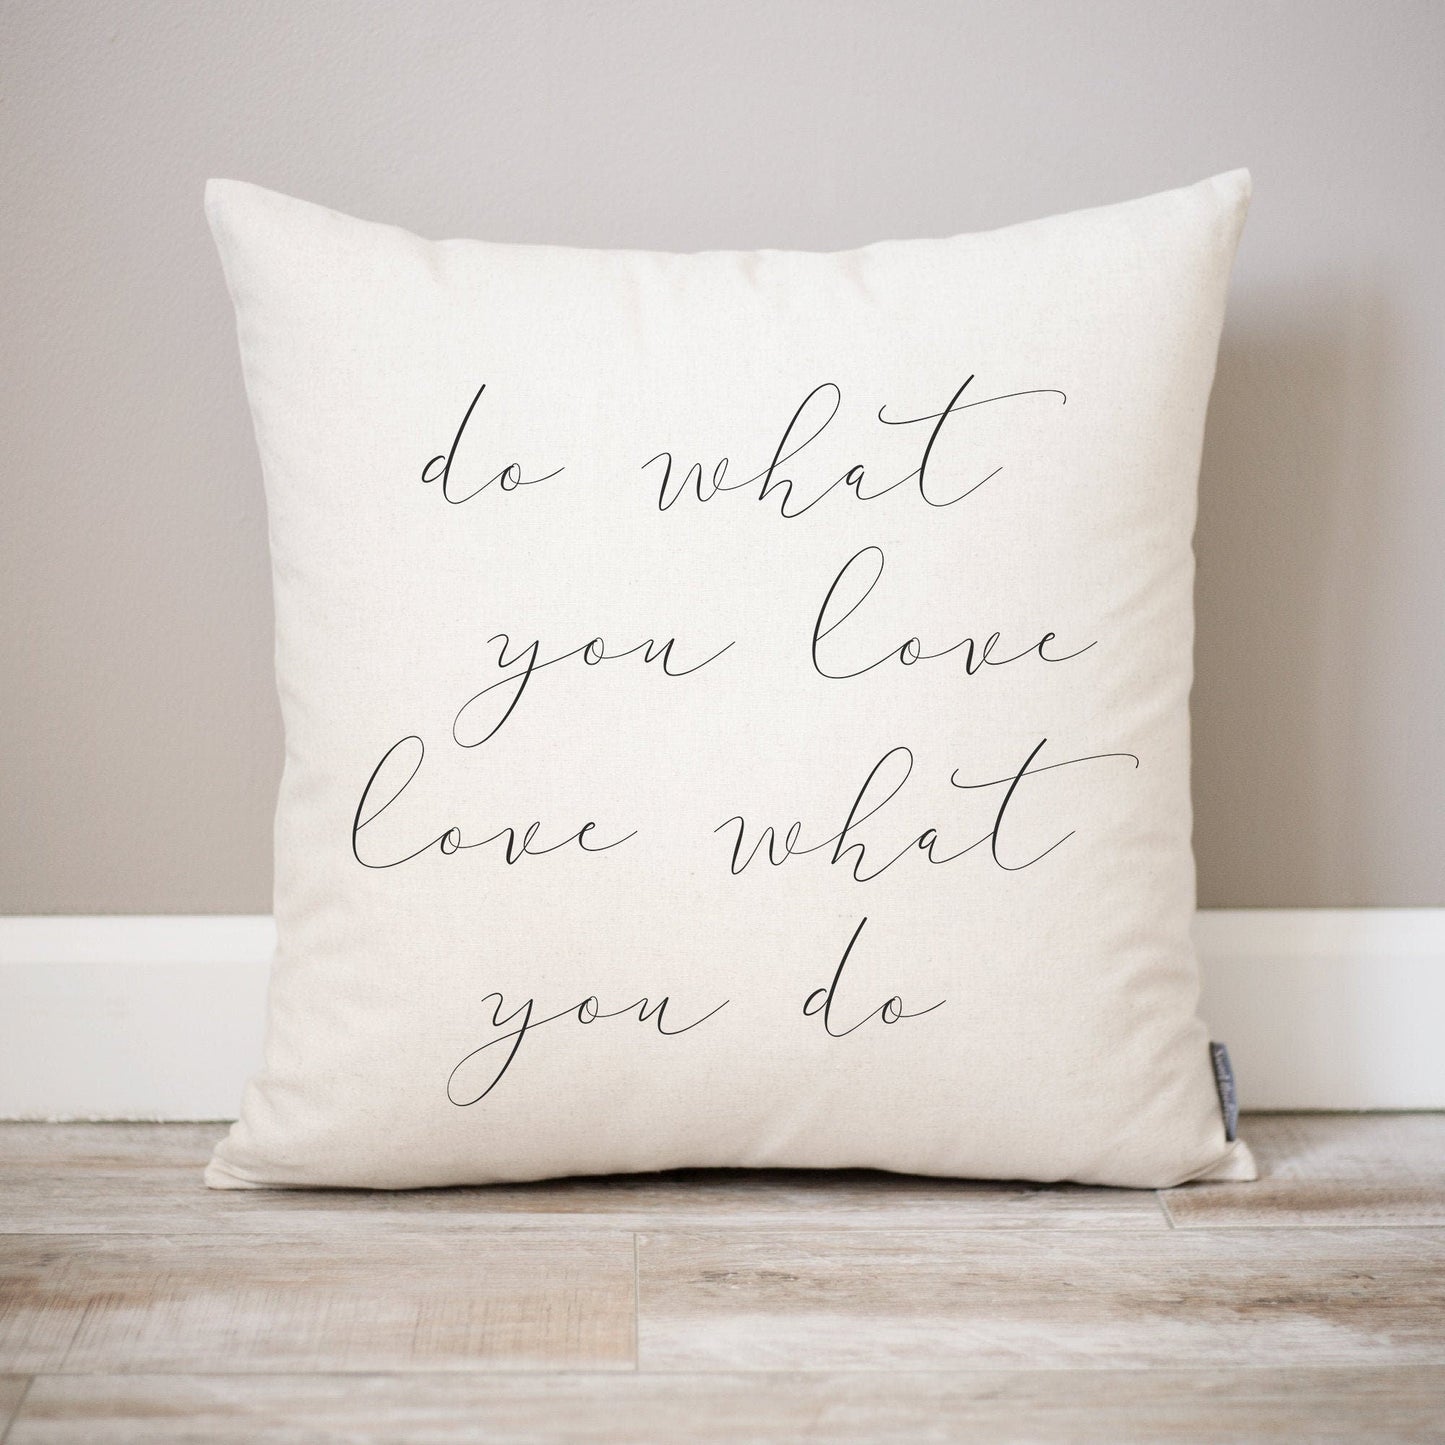 Do What You Love Pillow Dorm Decor | Going Away Dorm Gift for Son Gift for Daughter College Dorm Gifts | Unique Dorm Decor Pillow Ideas